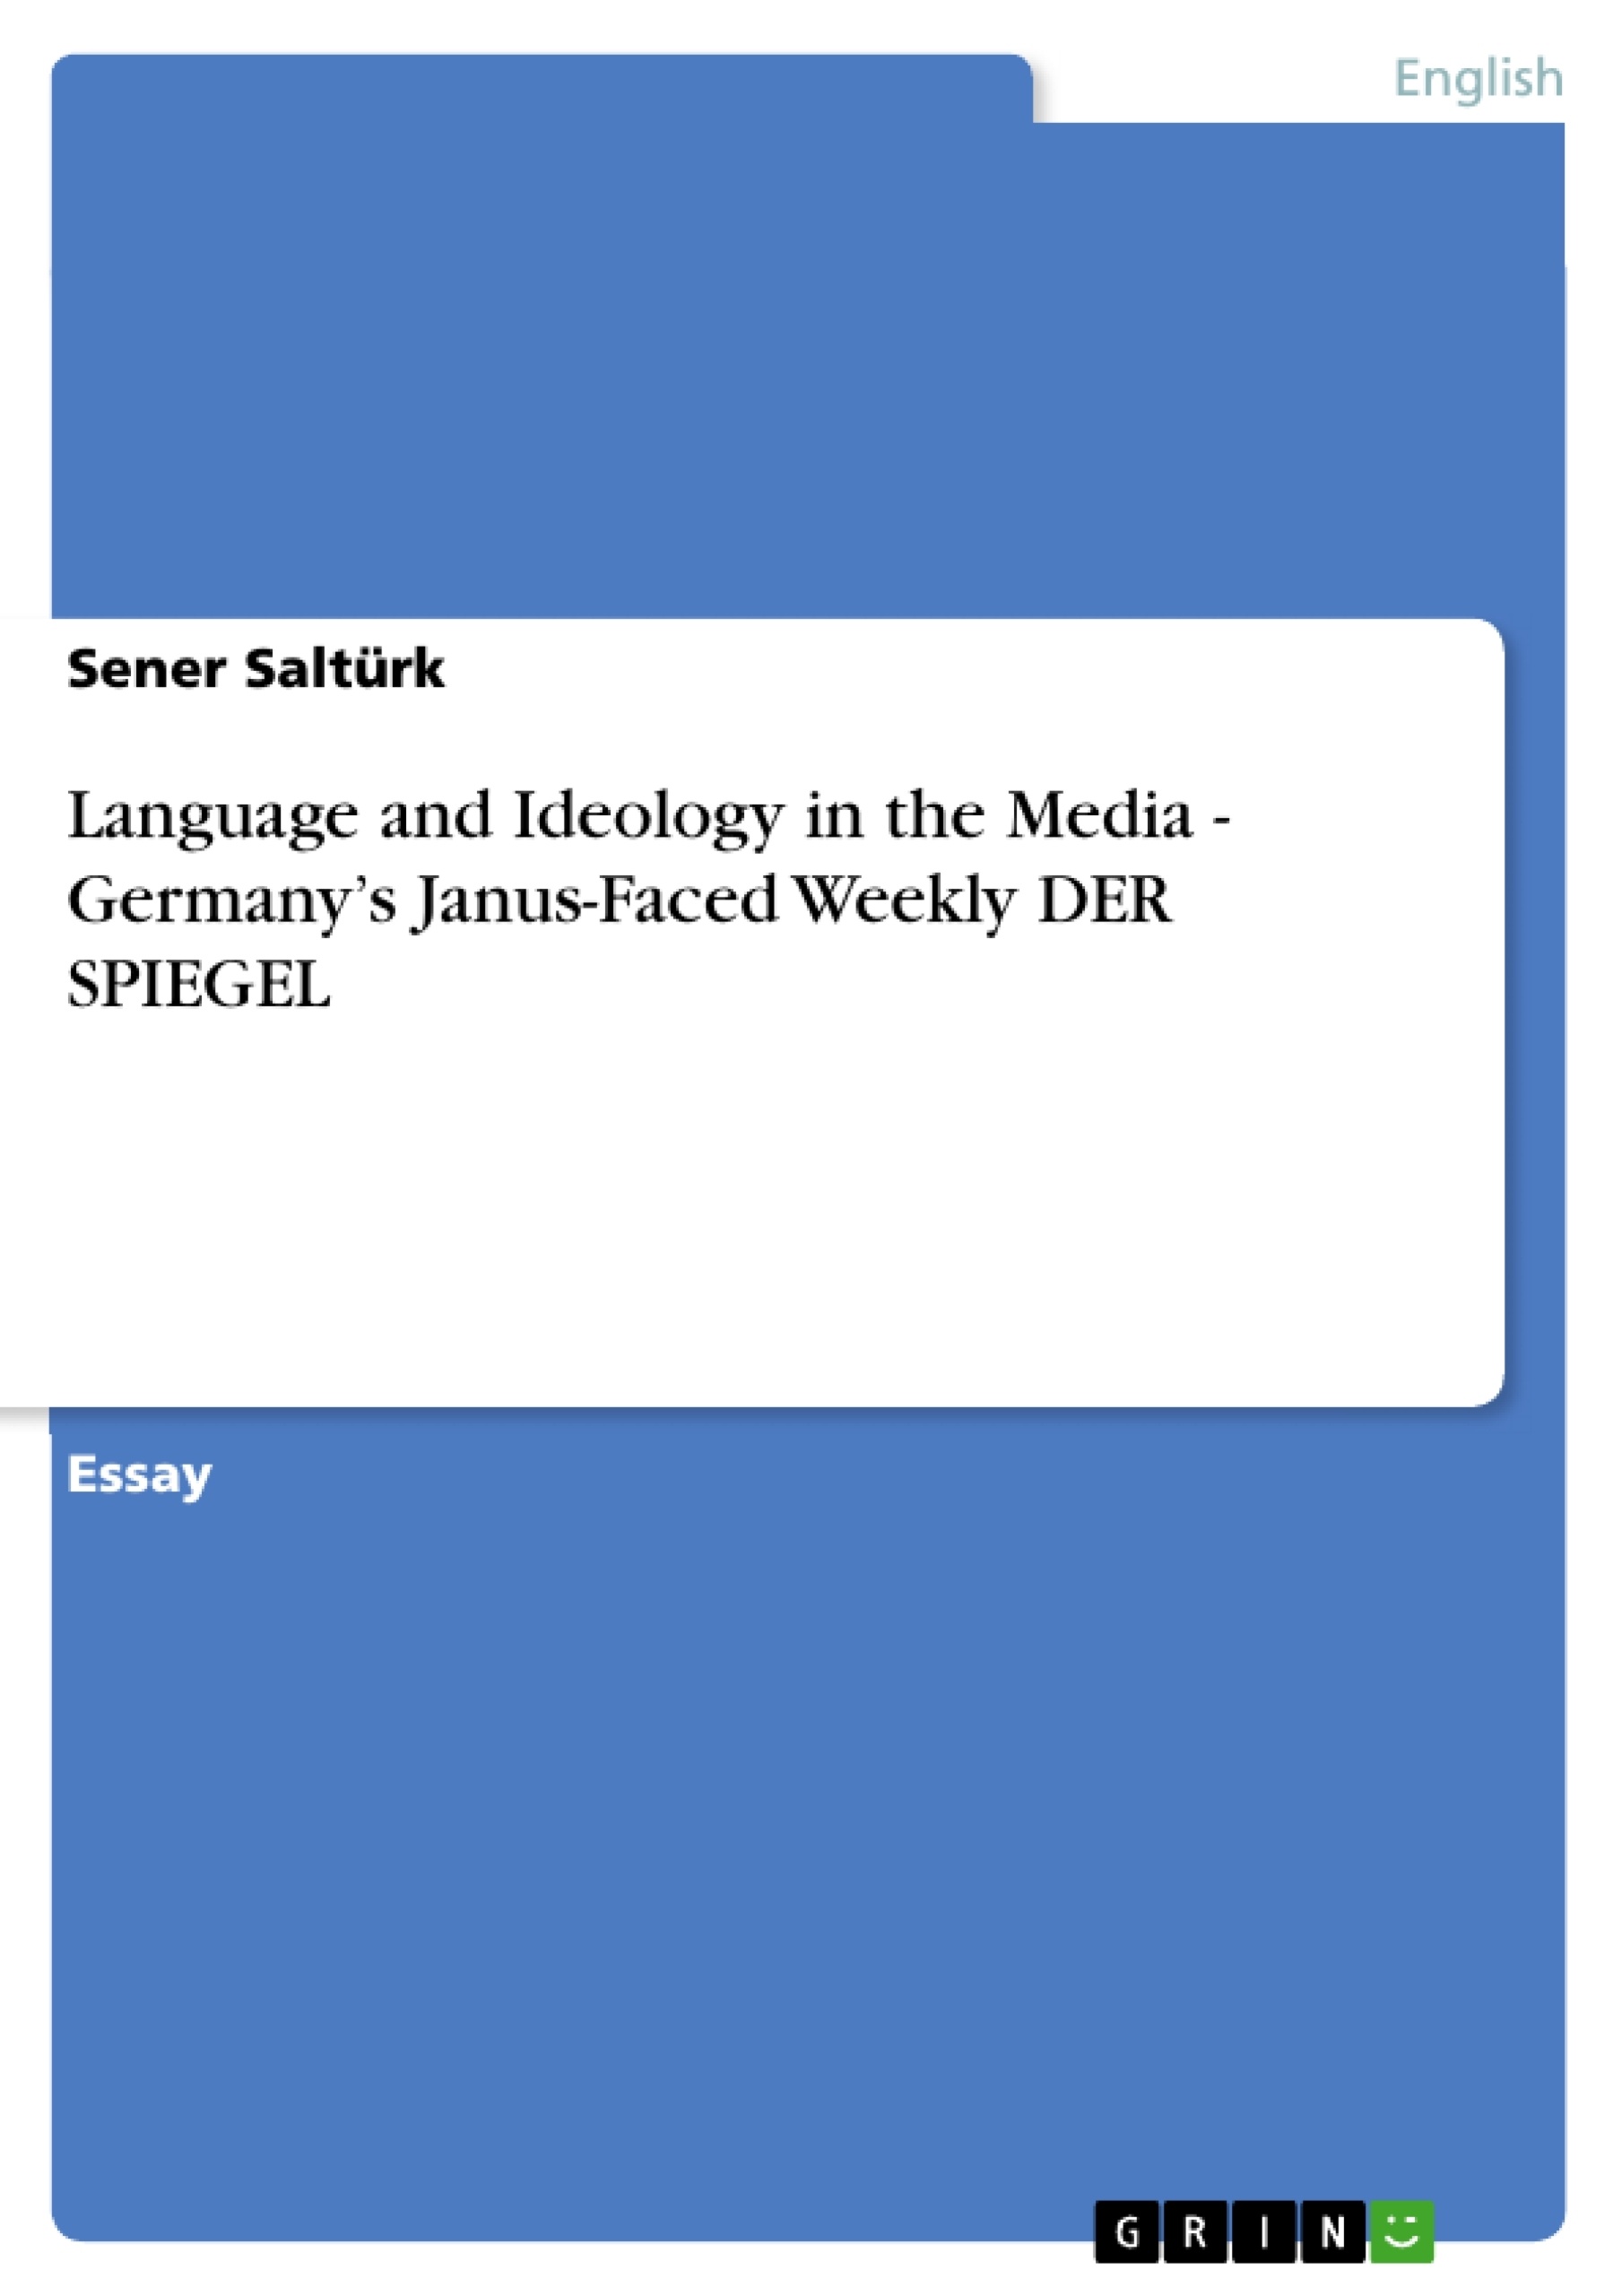 Title: Language and Ideology in the Media - Germany’s Janus-Faced Weekly DER SPIEGEL